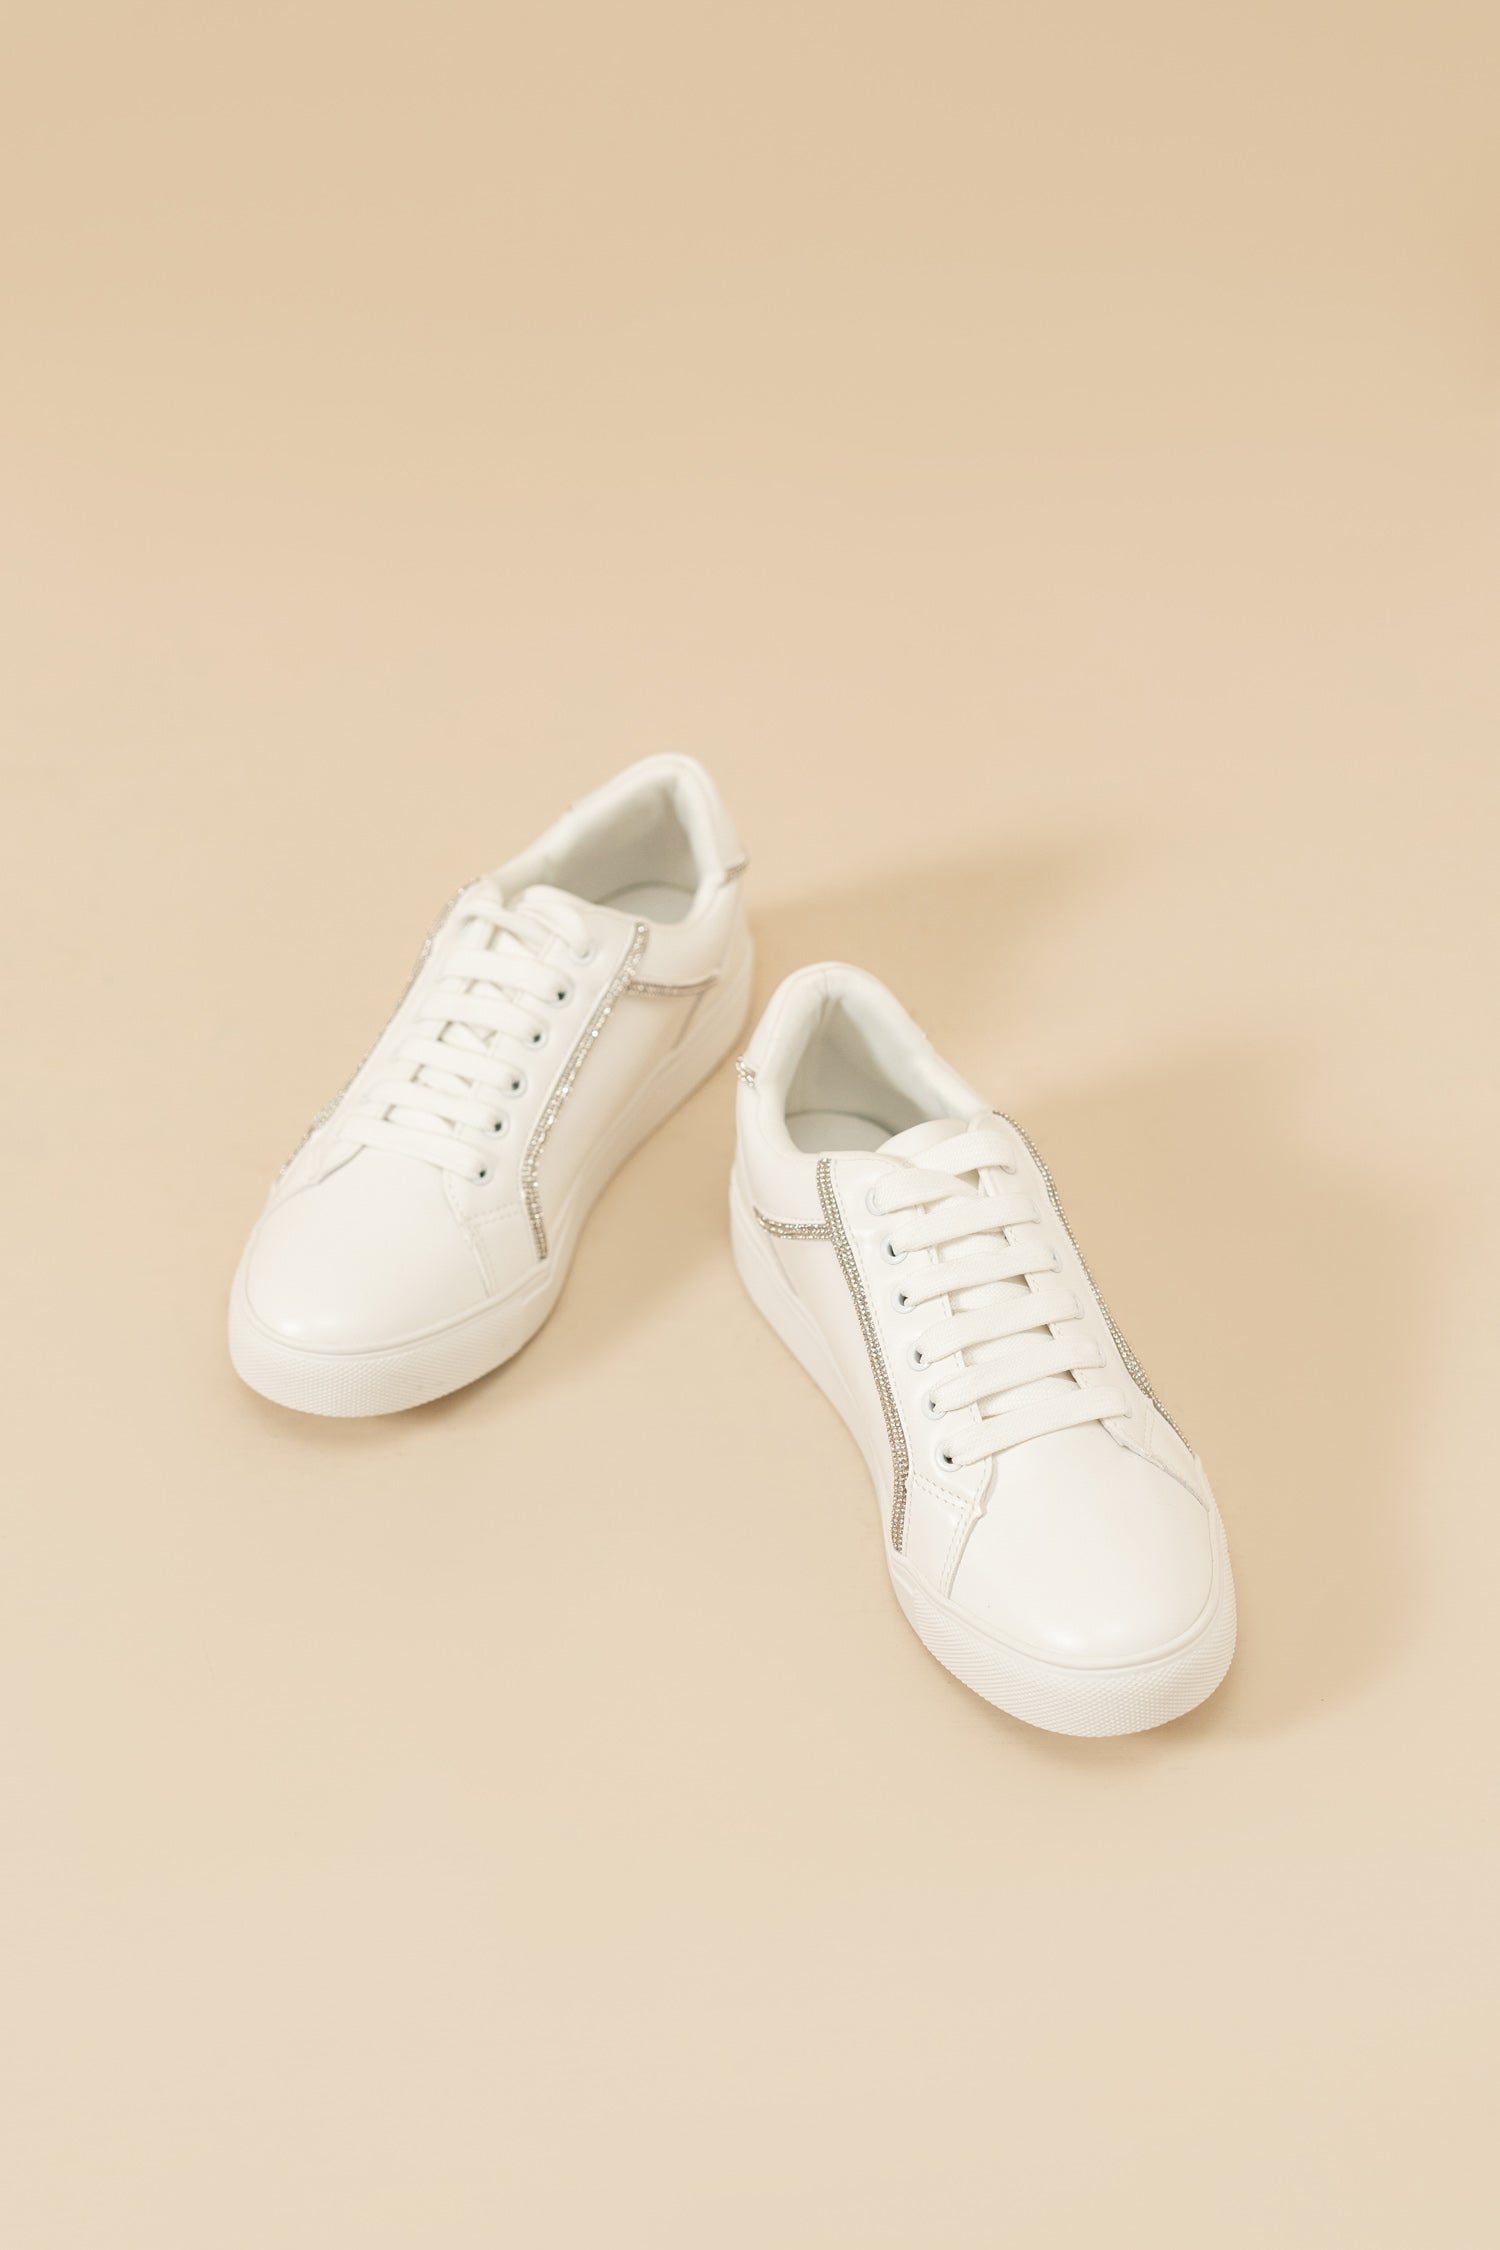 White Sneakers with Rhinestone detail